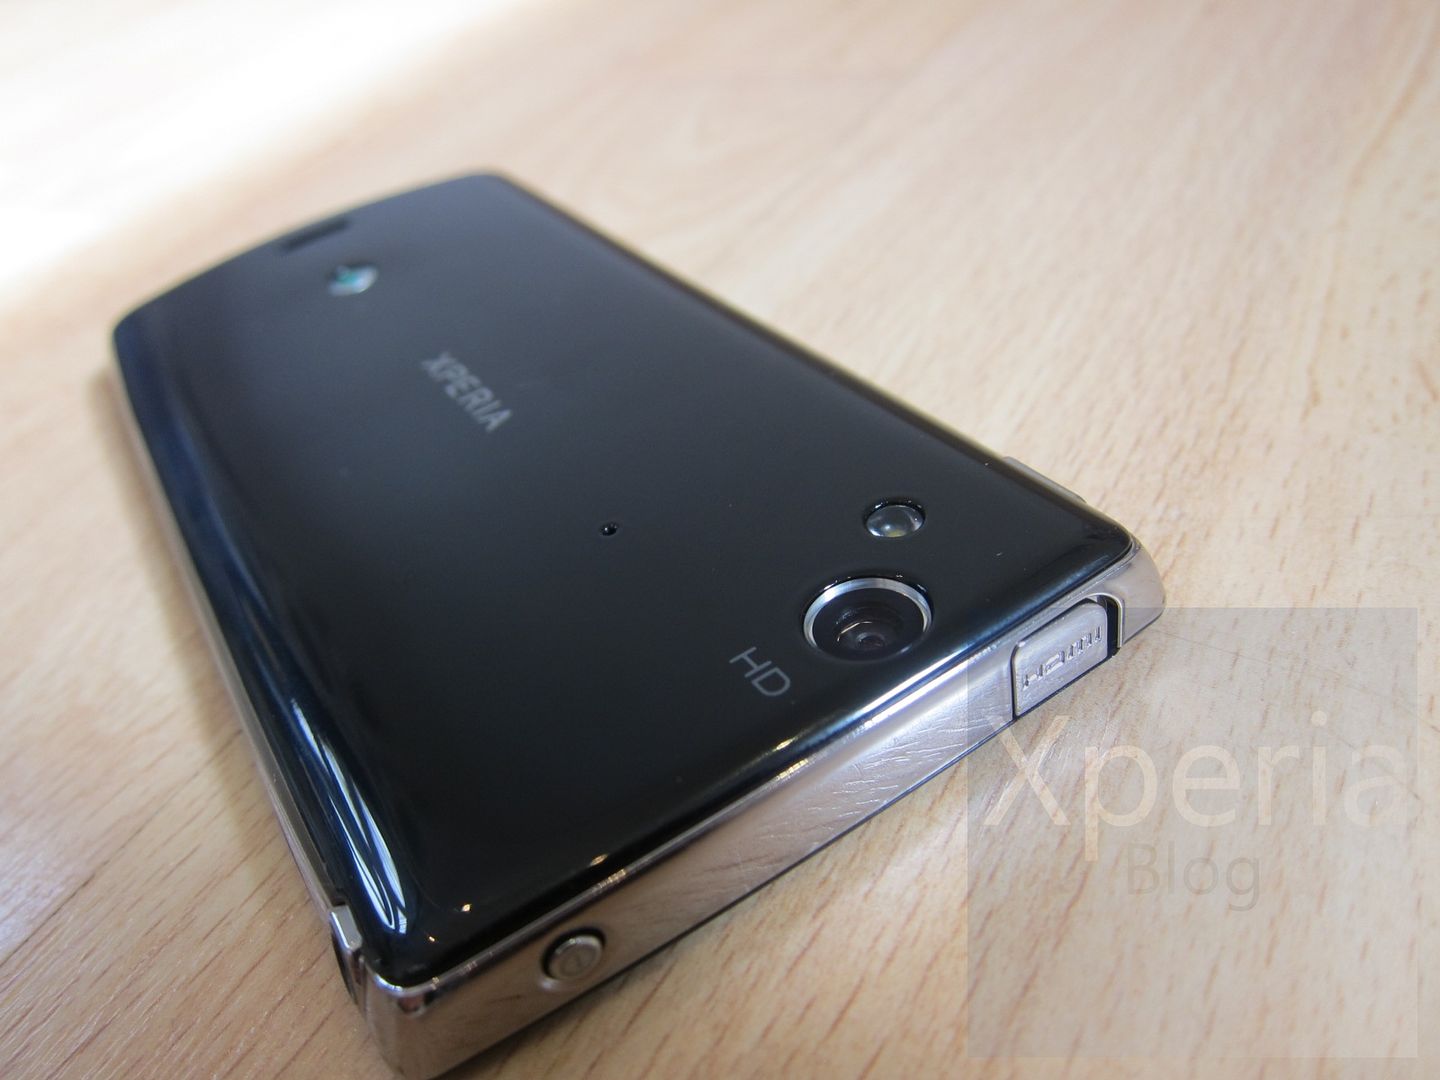 Xperia arc hardware review